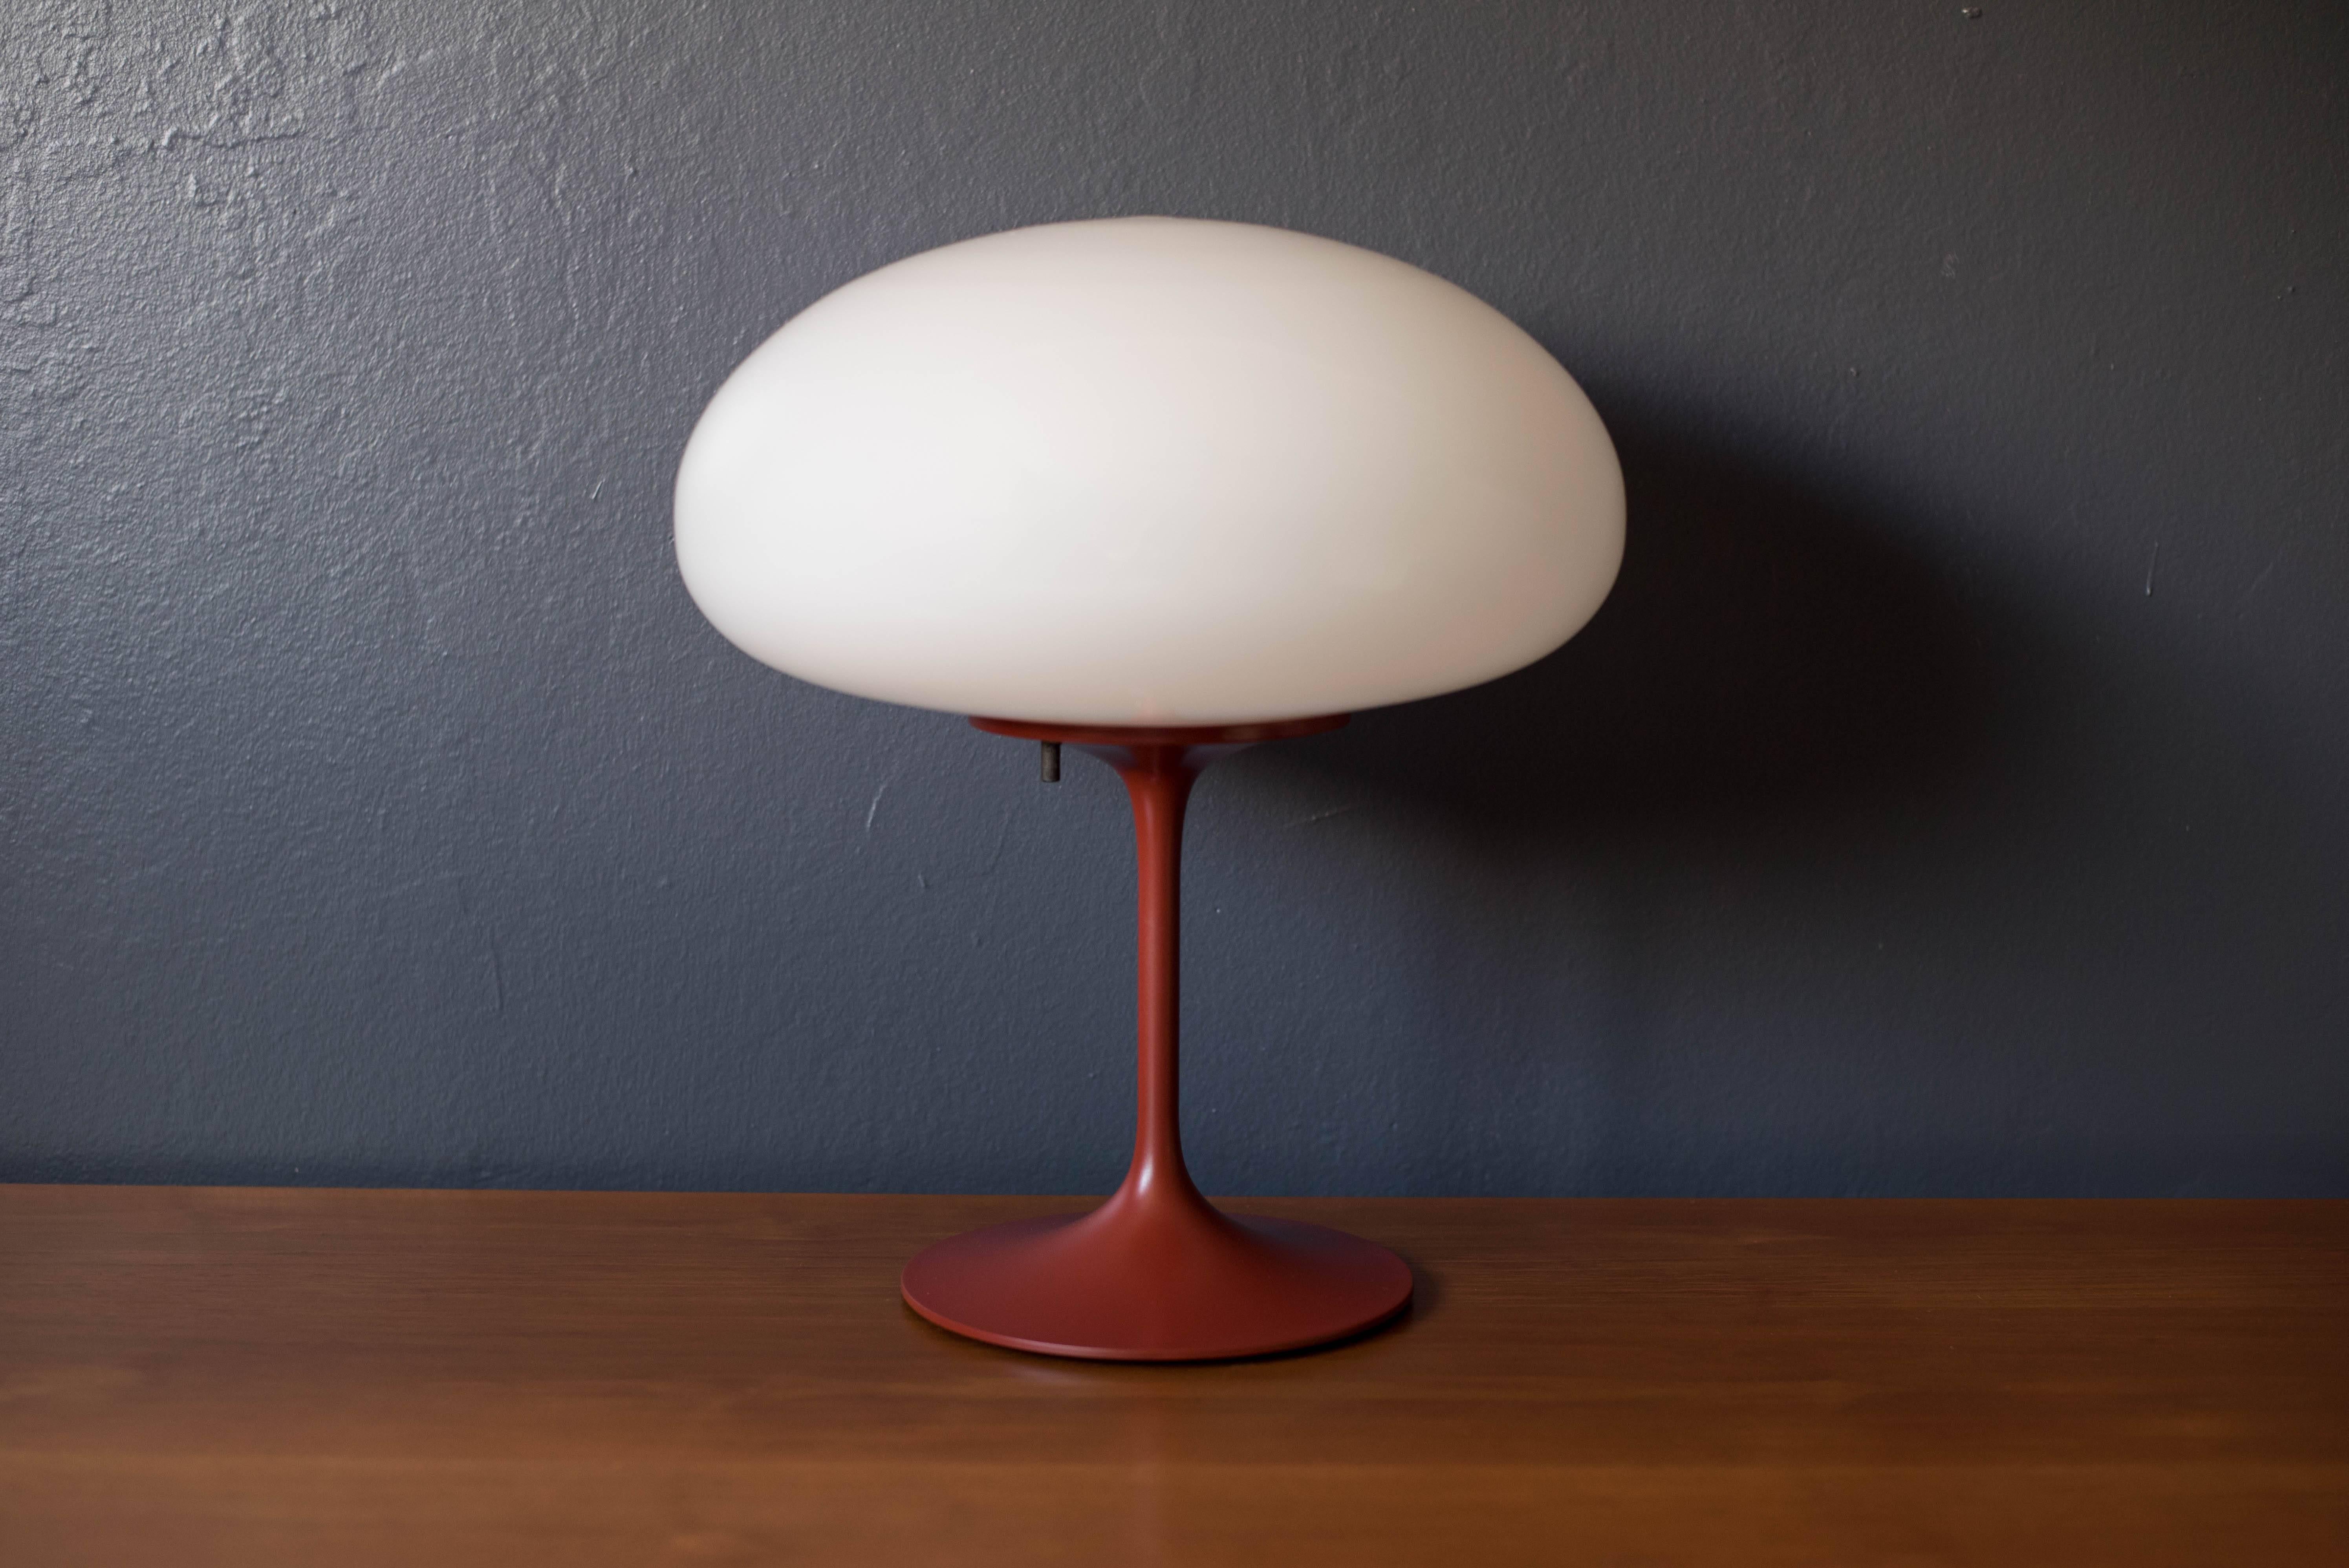 Vintage Stemlite lamp by Bill Curry for Design Line. This piece features a white glass globe and a red enamel finish.

Dimensions: 13